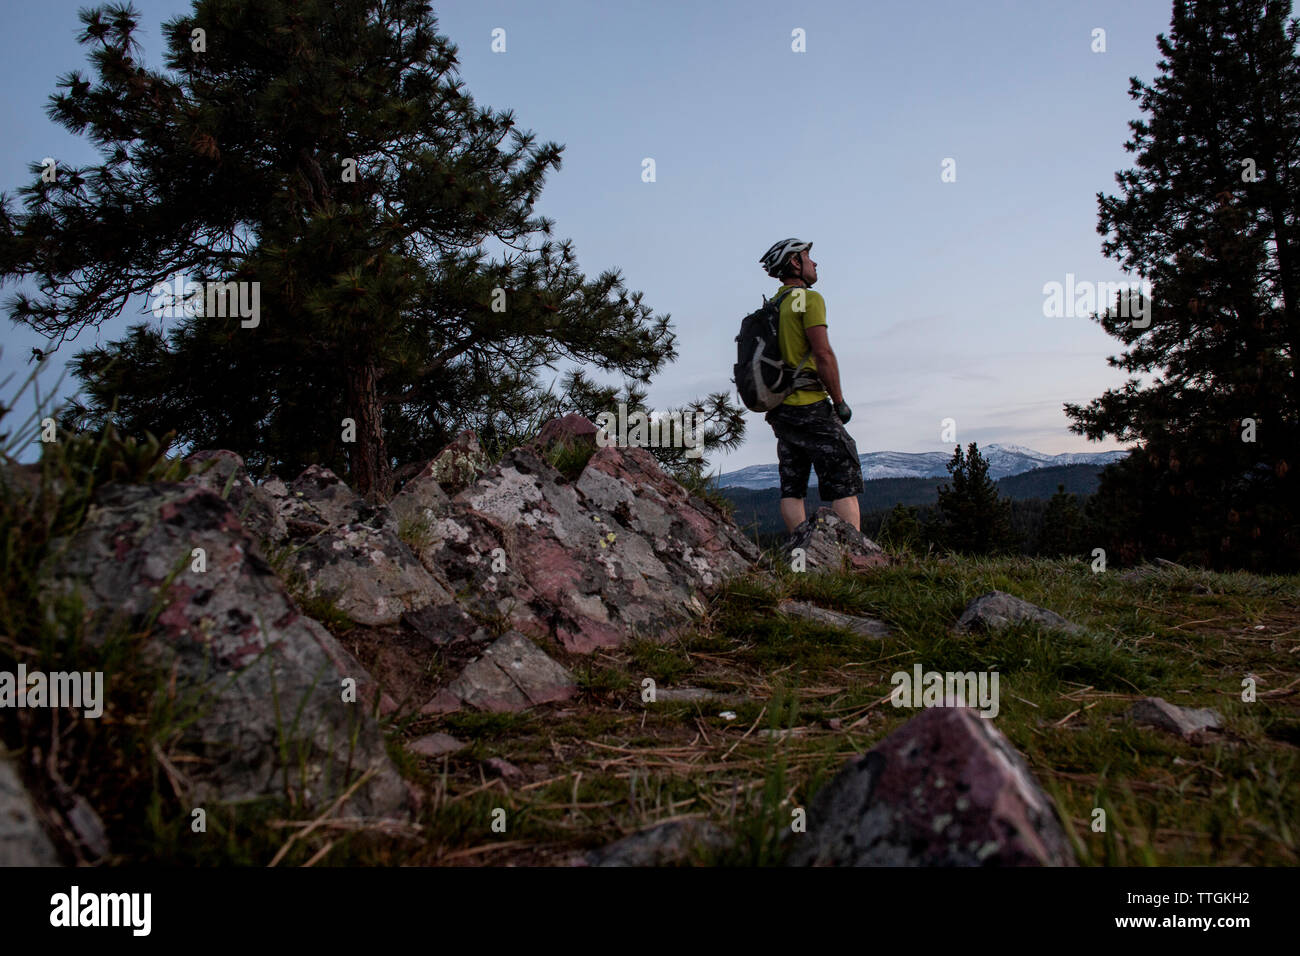 A male mountain biker at dusks takes in the view of Lolo Peak, Montana Stock Photo